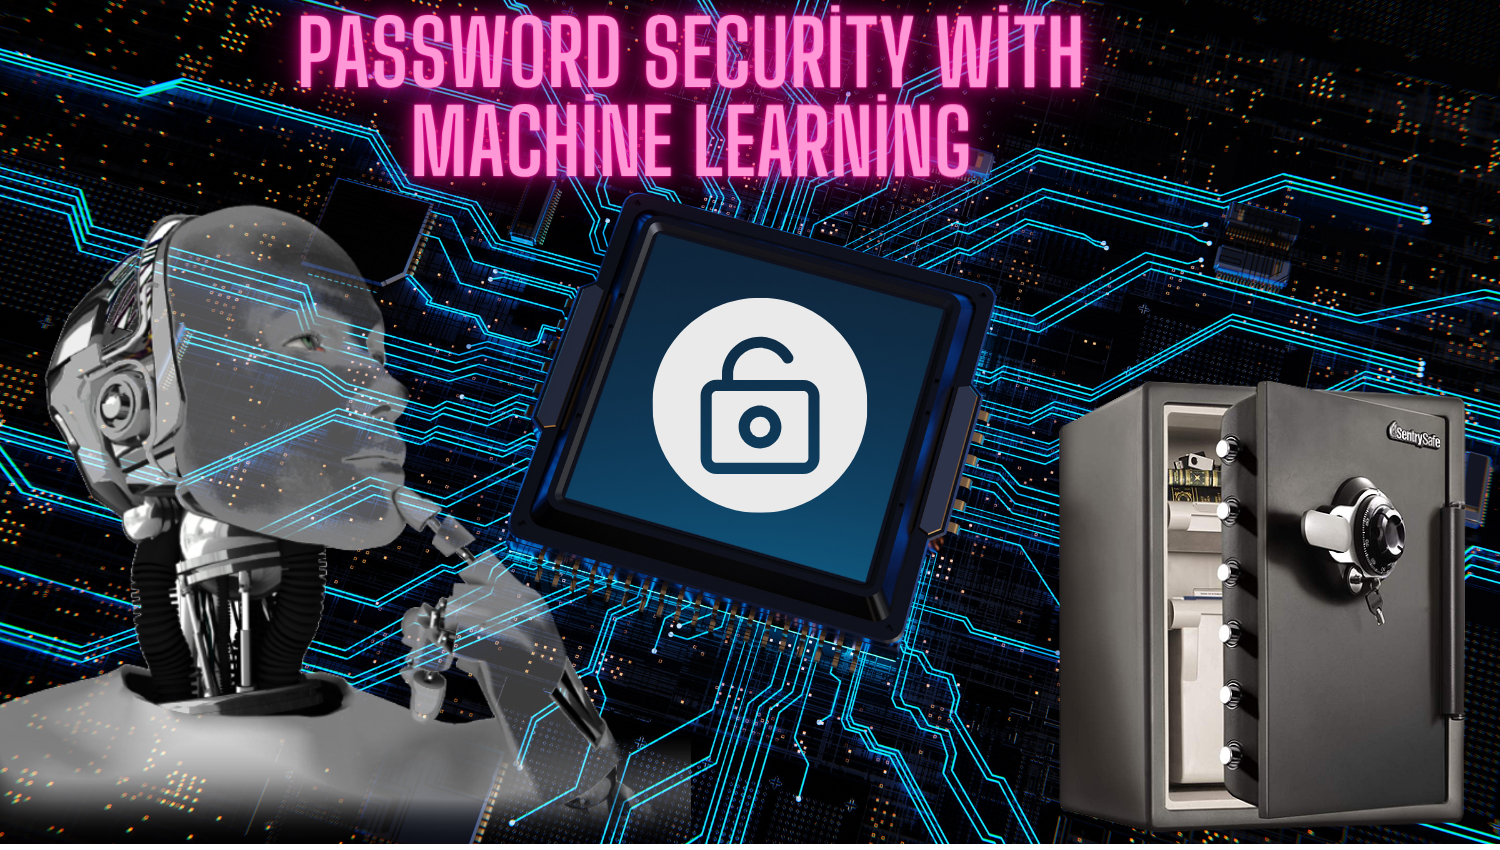 Explore how machine learning techniques can bolster online security by enhancing password security. Learn about the significance of strong passwords, the role of machine learning in password classification, and practical tips for creating secure passwords